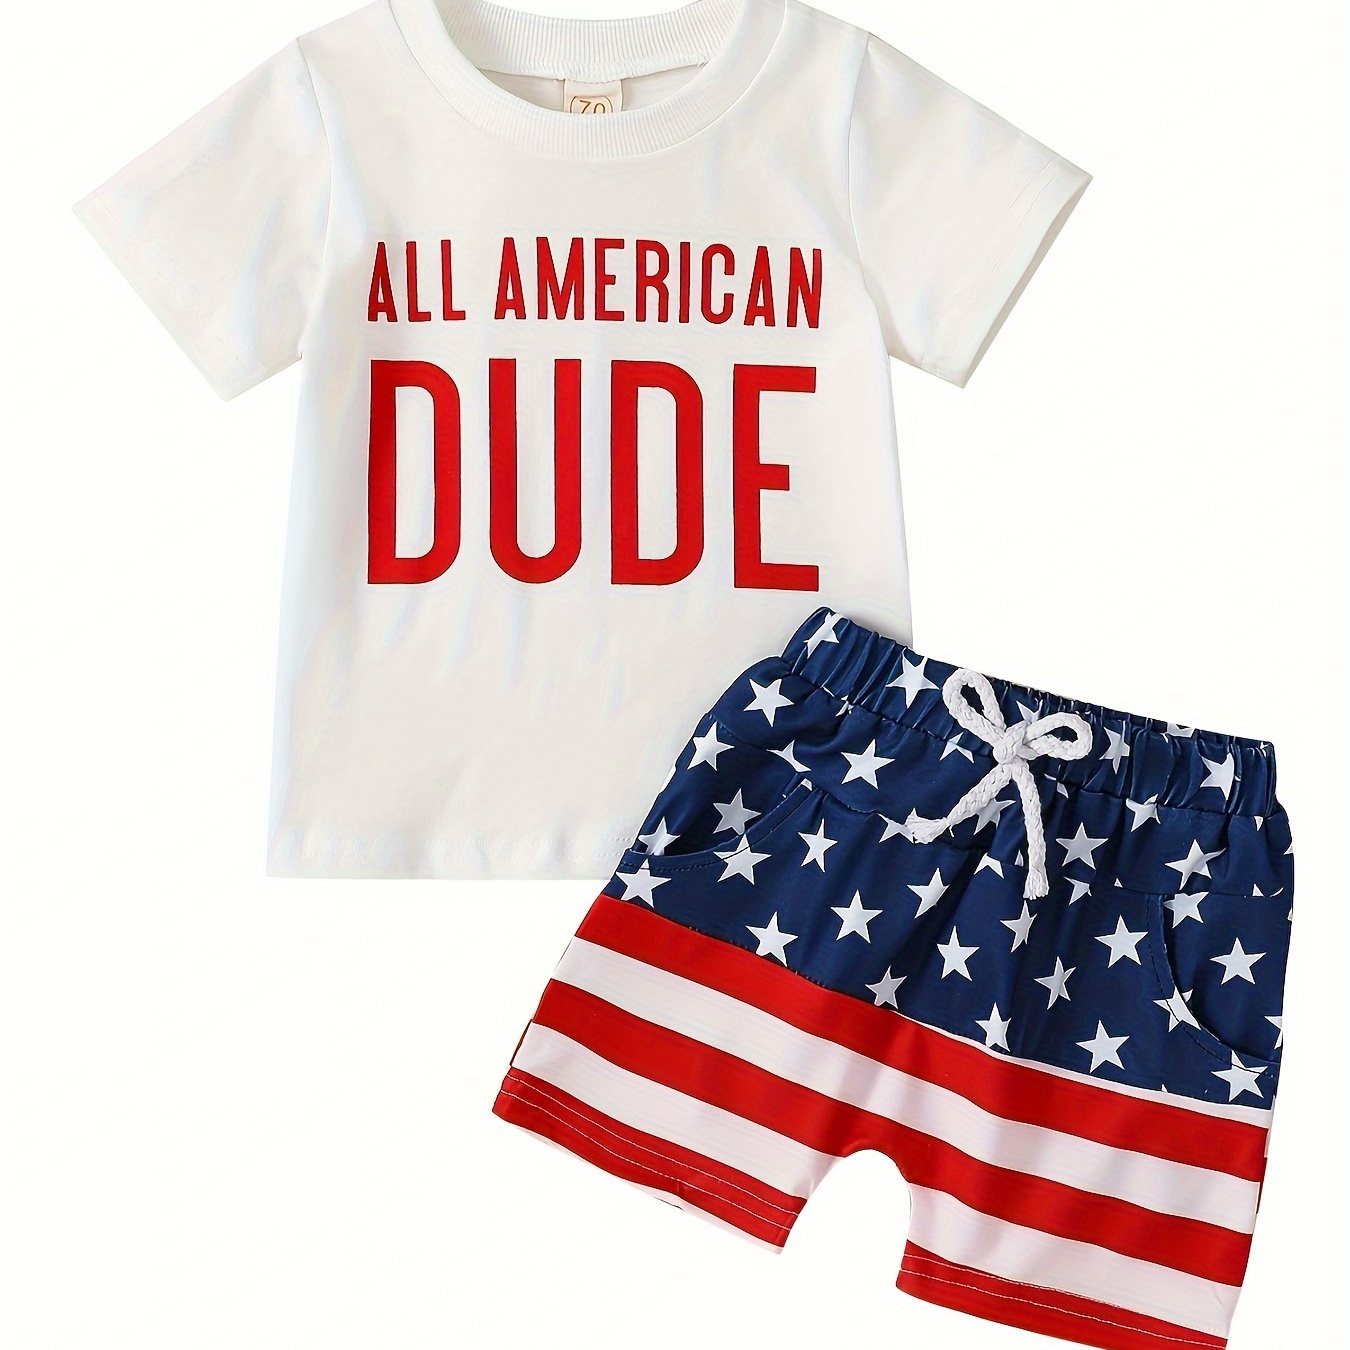 

2pcs Baby Boys Patriotic Independence Day Cotton Outfit Set, Casual Style Short Sleeve 'all American Dude' T-shirt With Star Spangled Striped Shorts Set